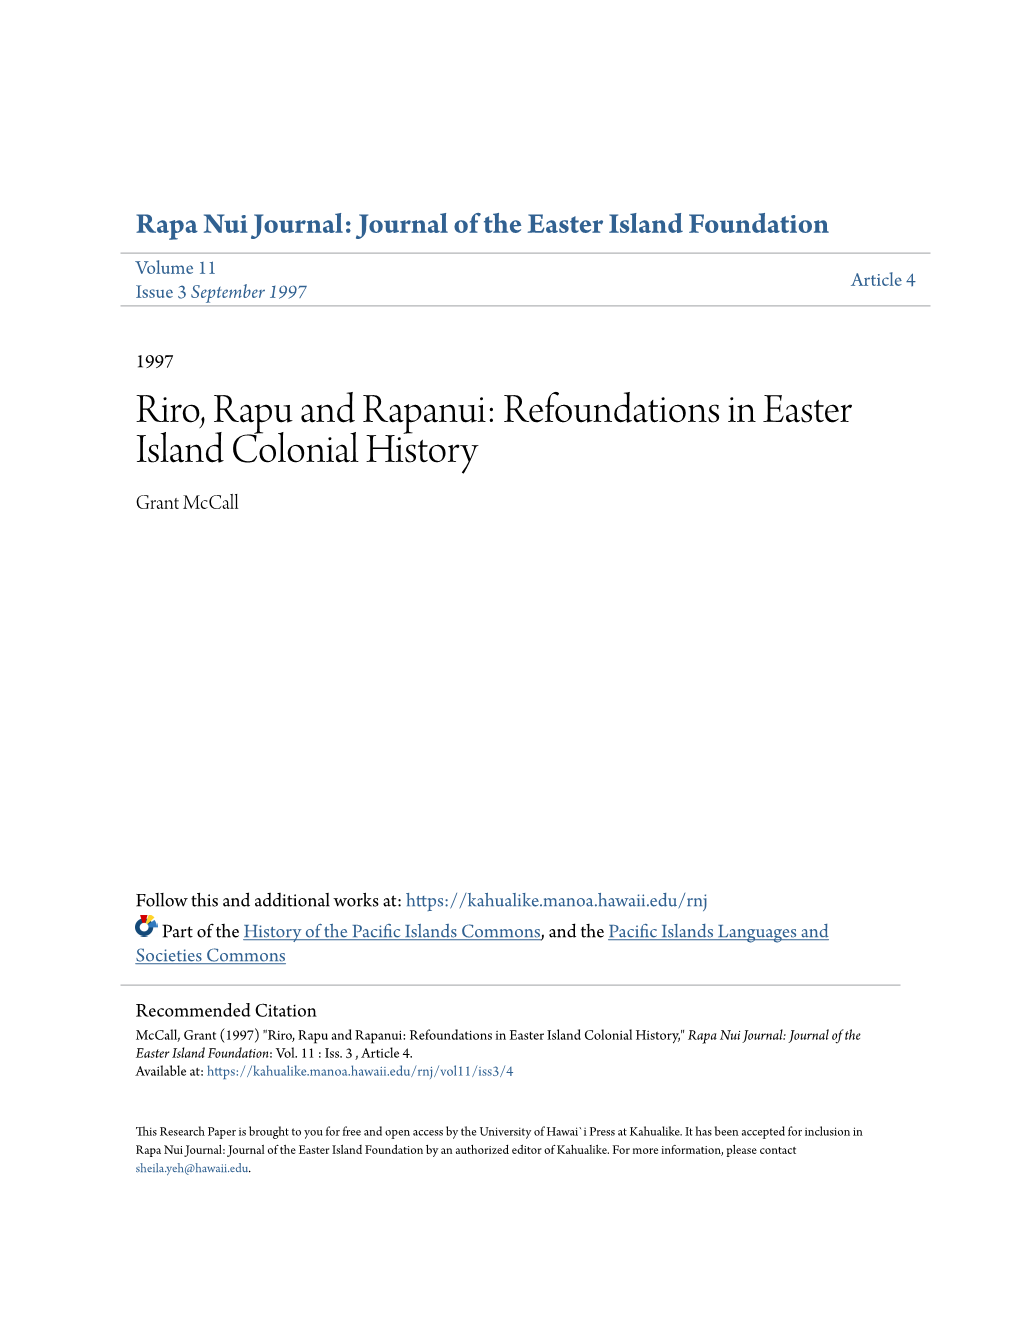 Riro, Rapu and Rapanui: Refoundations in Easter Island Colonial History Grant Mccall